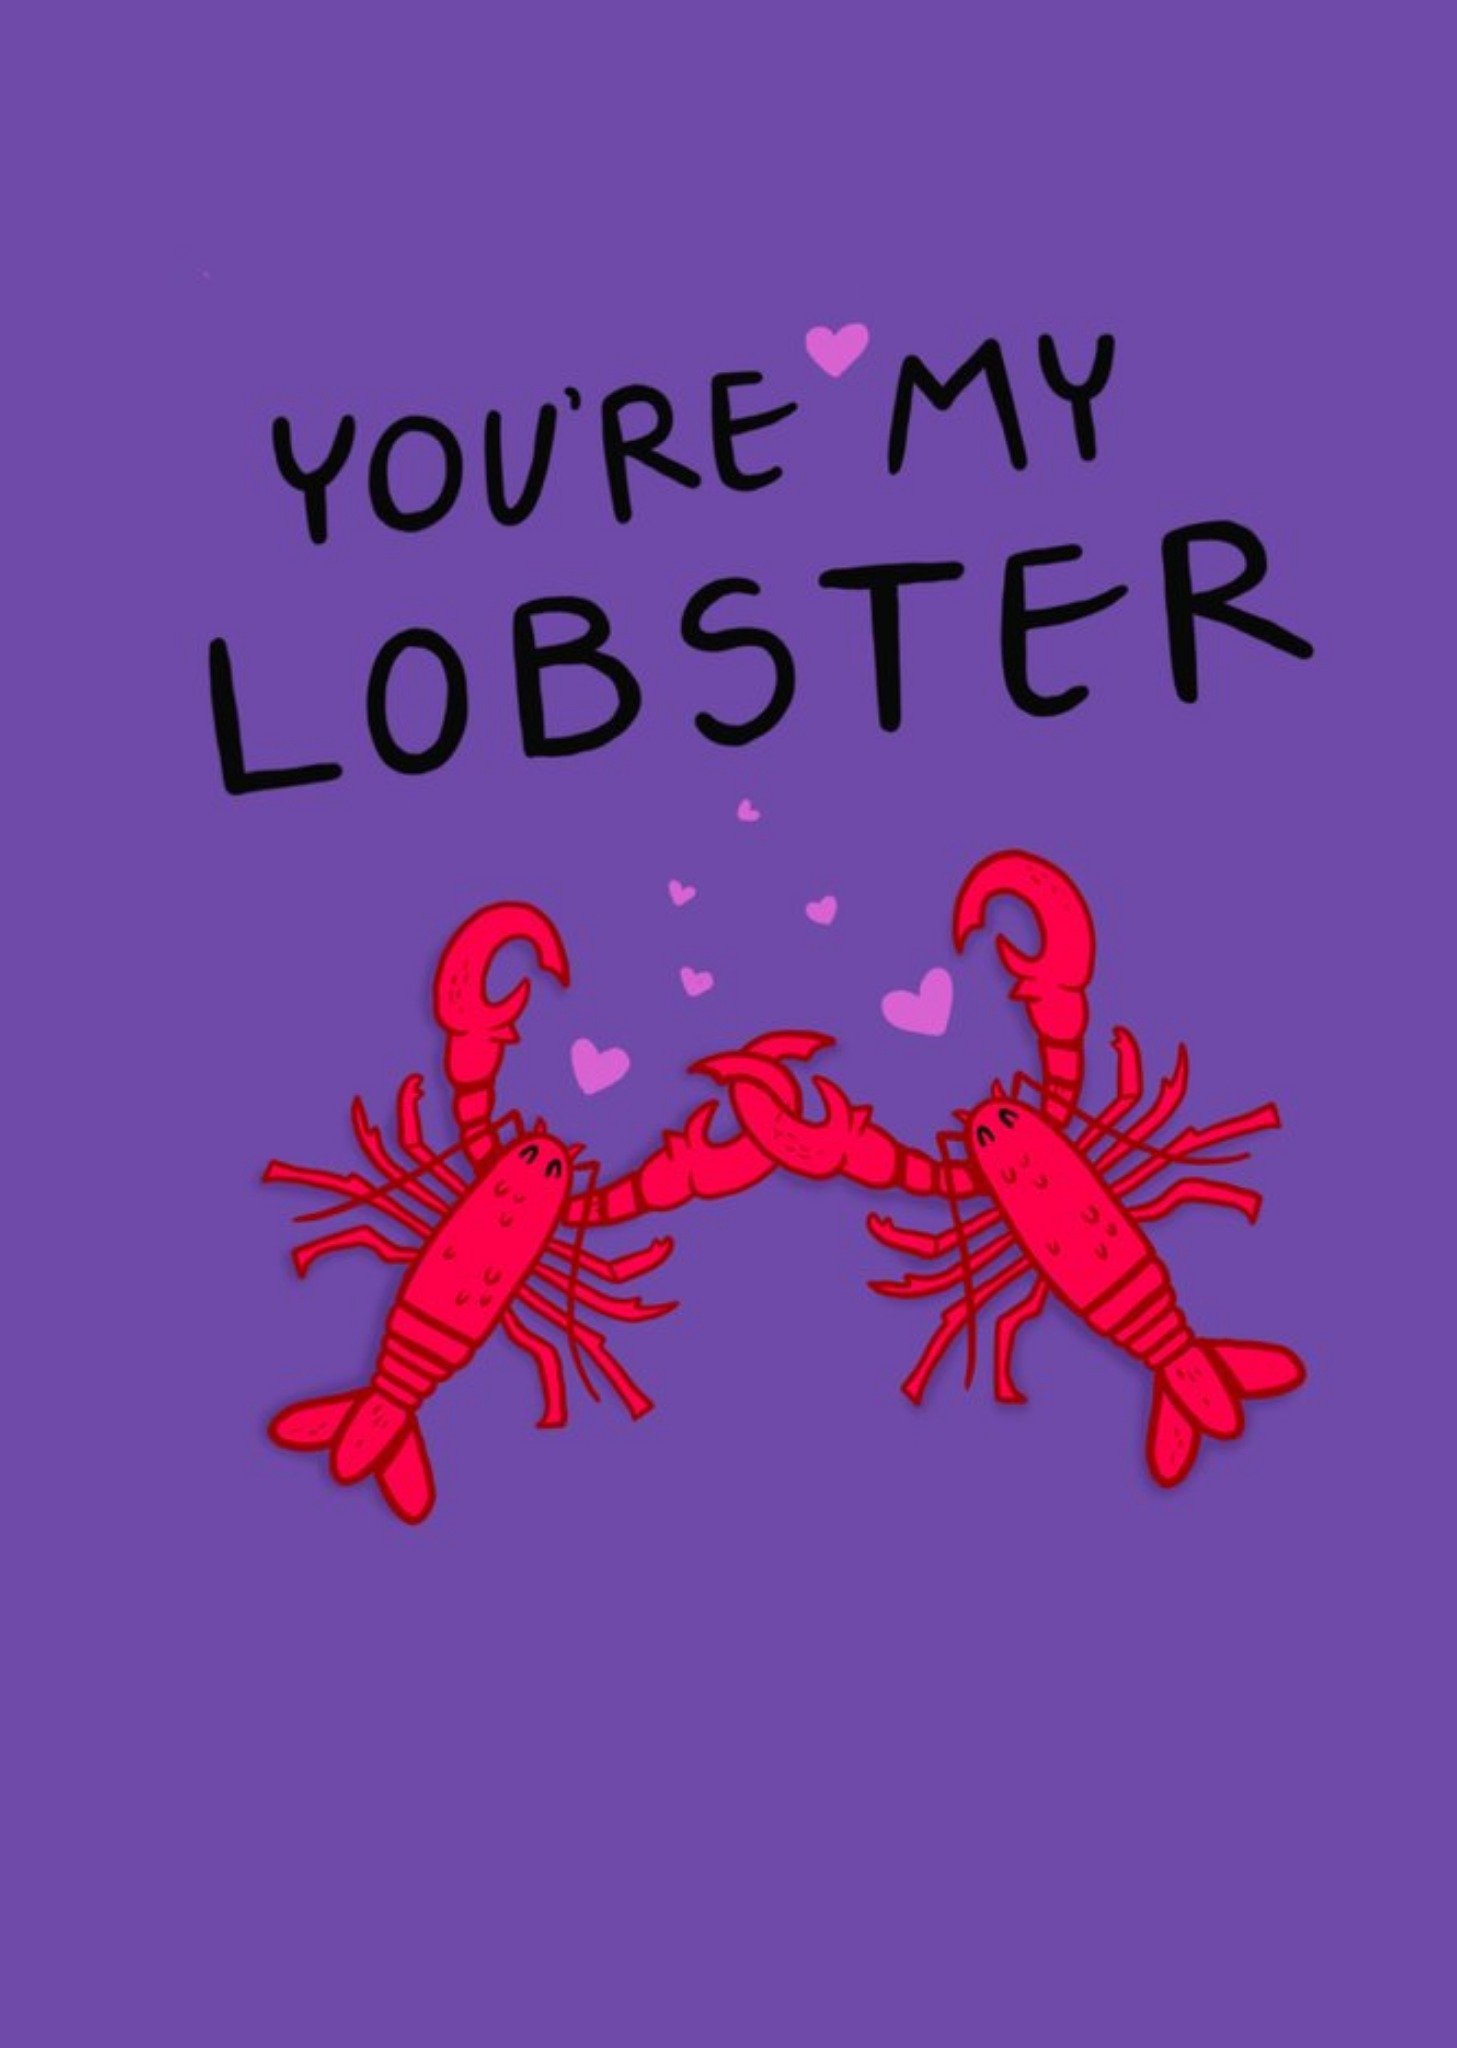 Moonpig Illustration Of A Pair Of Lobsters On A Purple Background You're My Lobster Card, Large